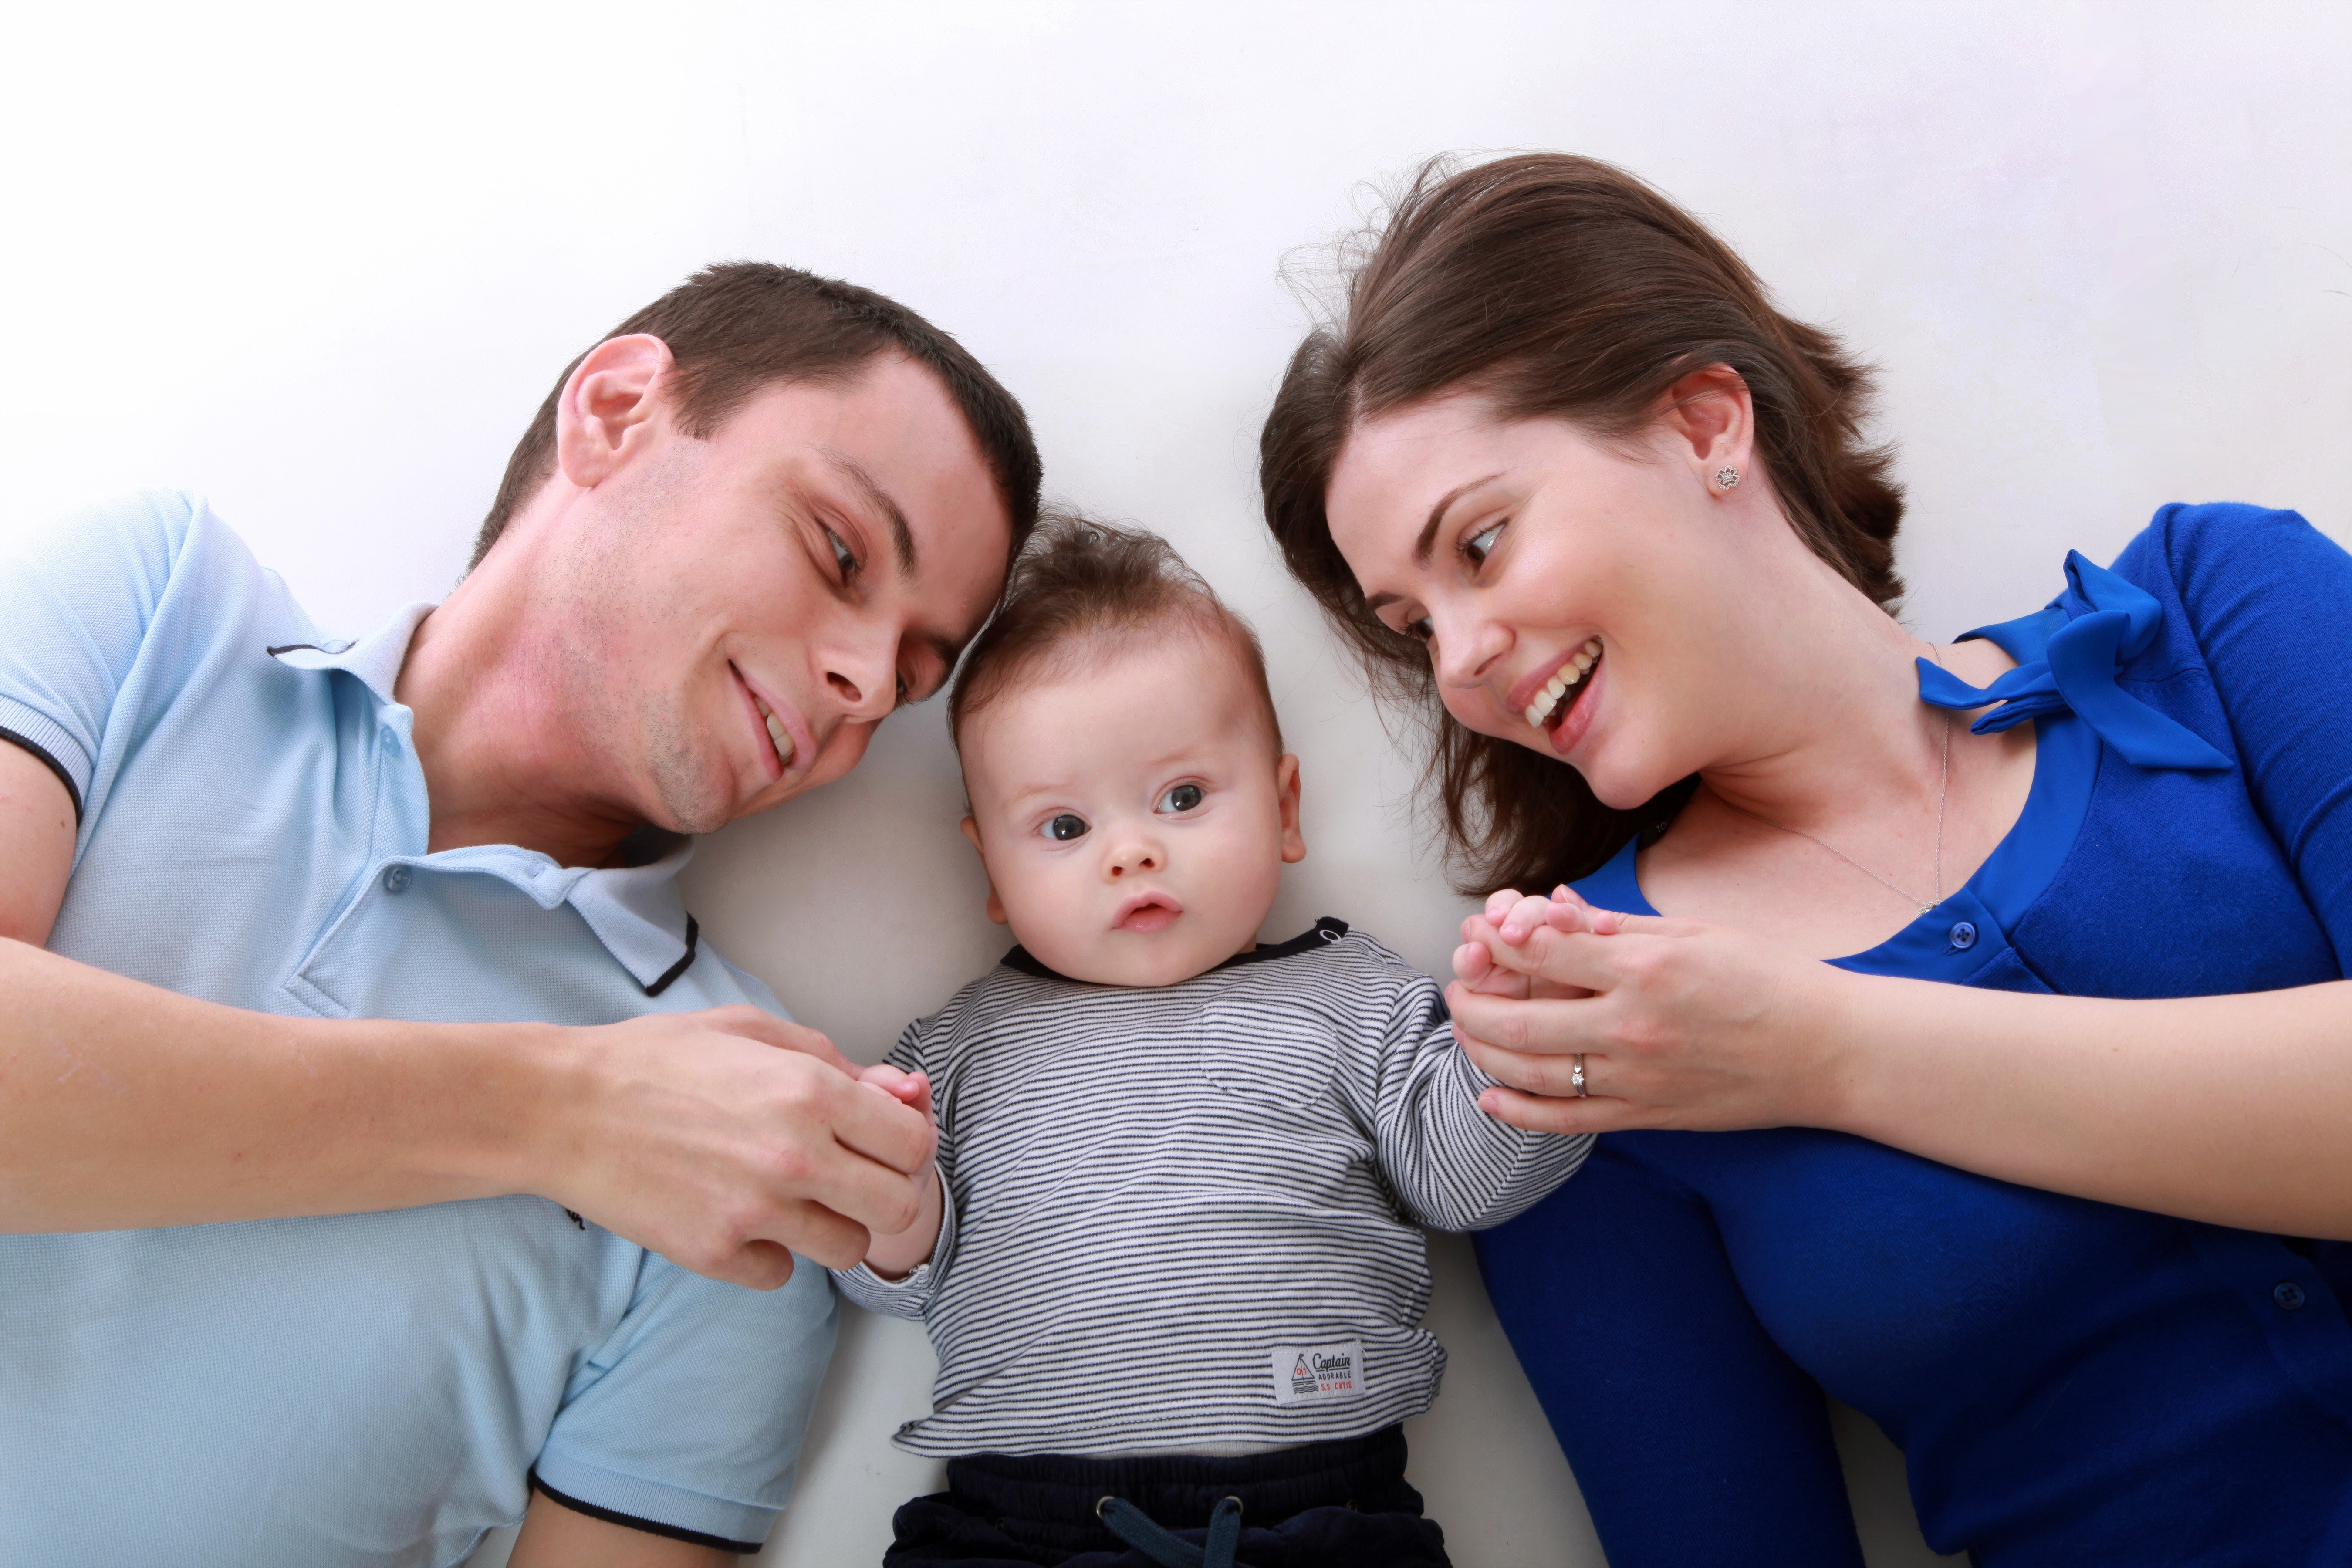 Man beside baby and woman photo